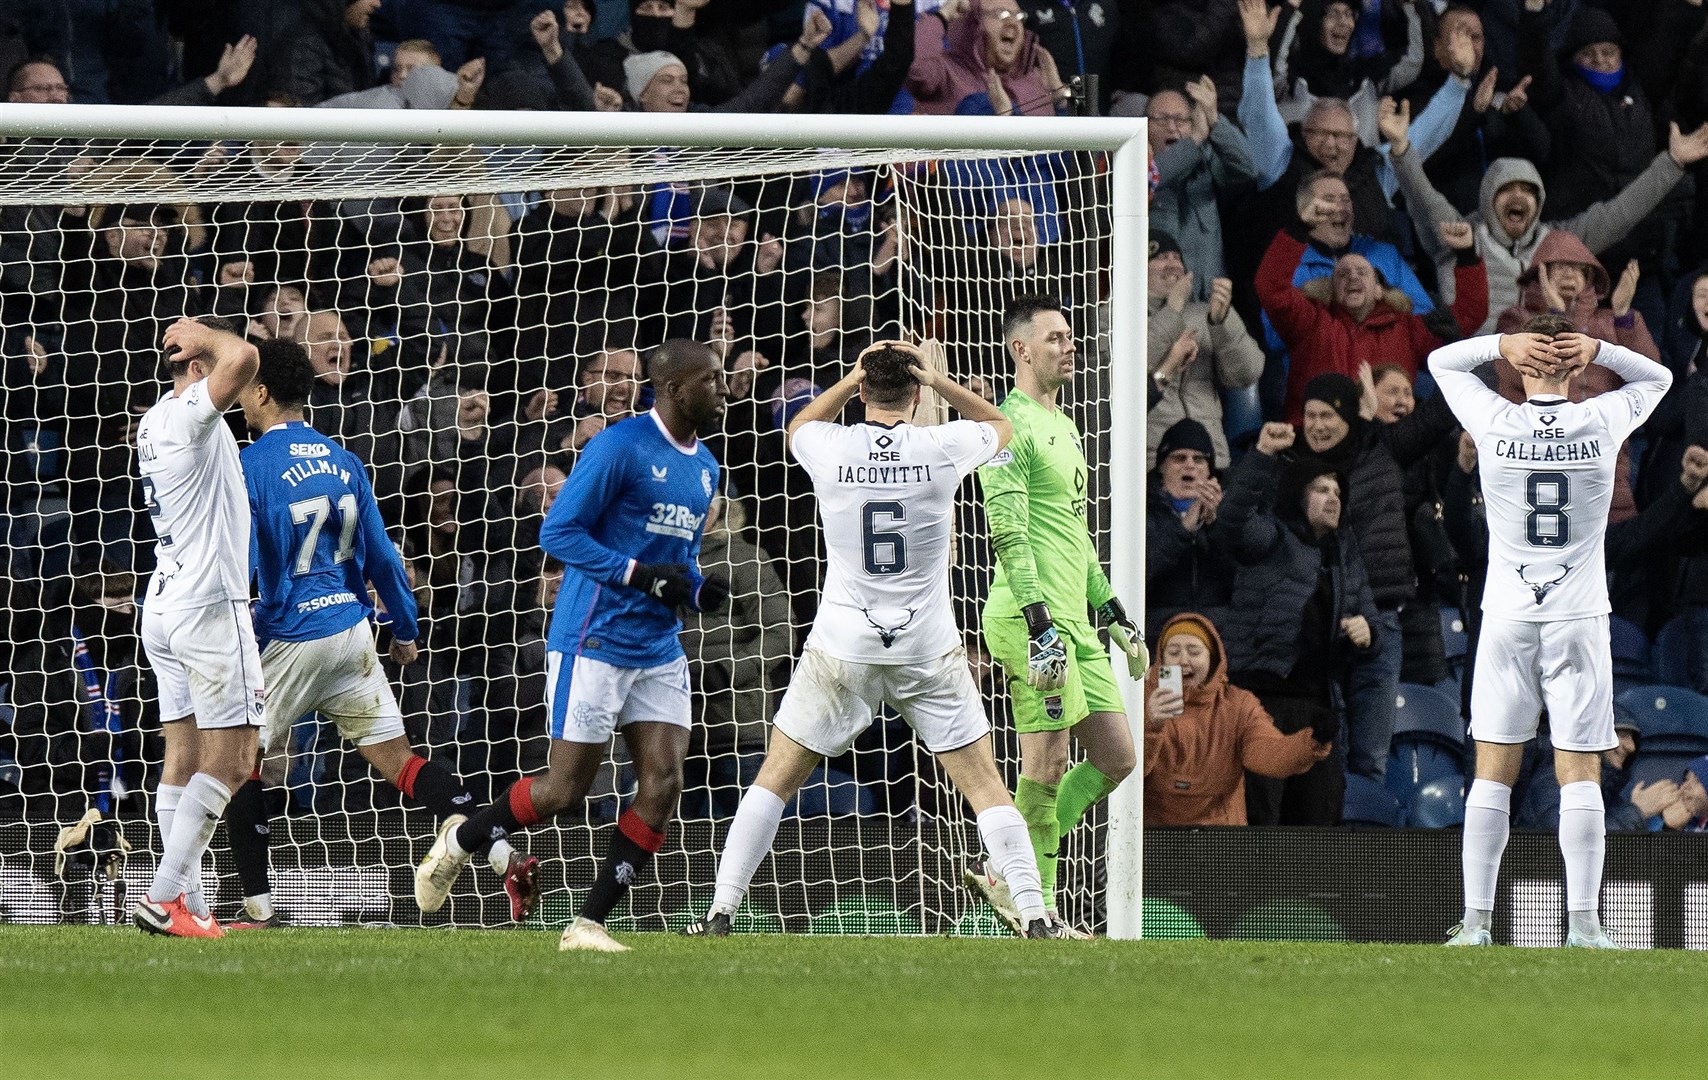 Picture - Ken Macpherson. Rangers(2) v Ross County(1). 04/02/23. This free-kick from Rangers' Borna Barisic took a massive deflection past Ross County 'keeper Ross Laidlaw for the winning goal.